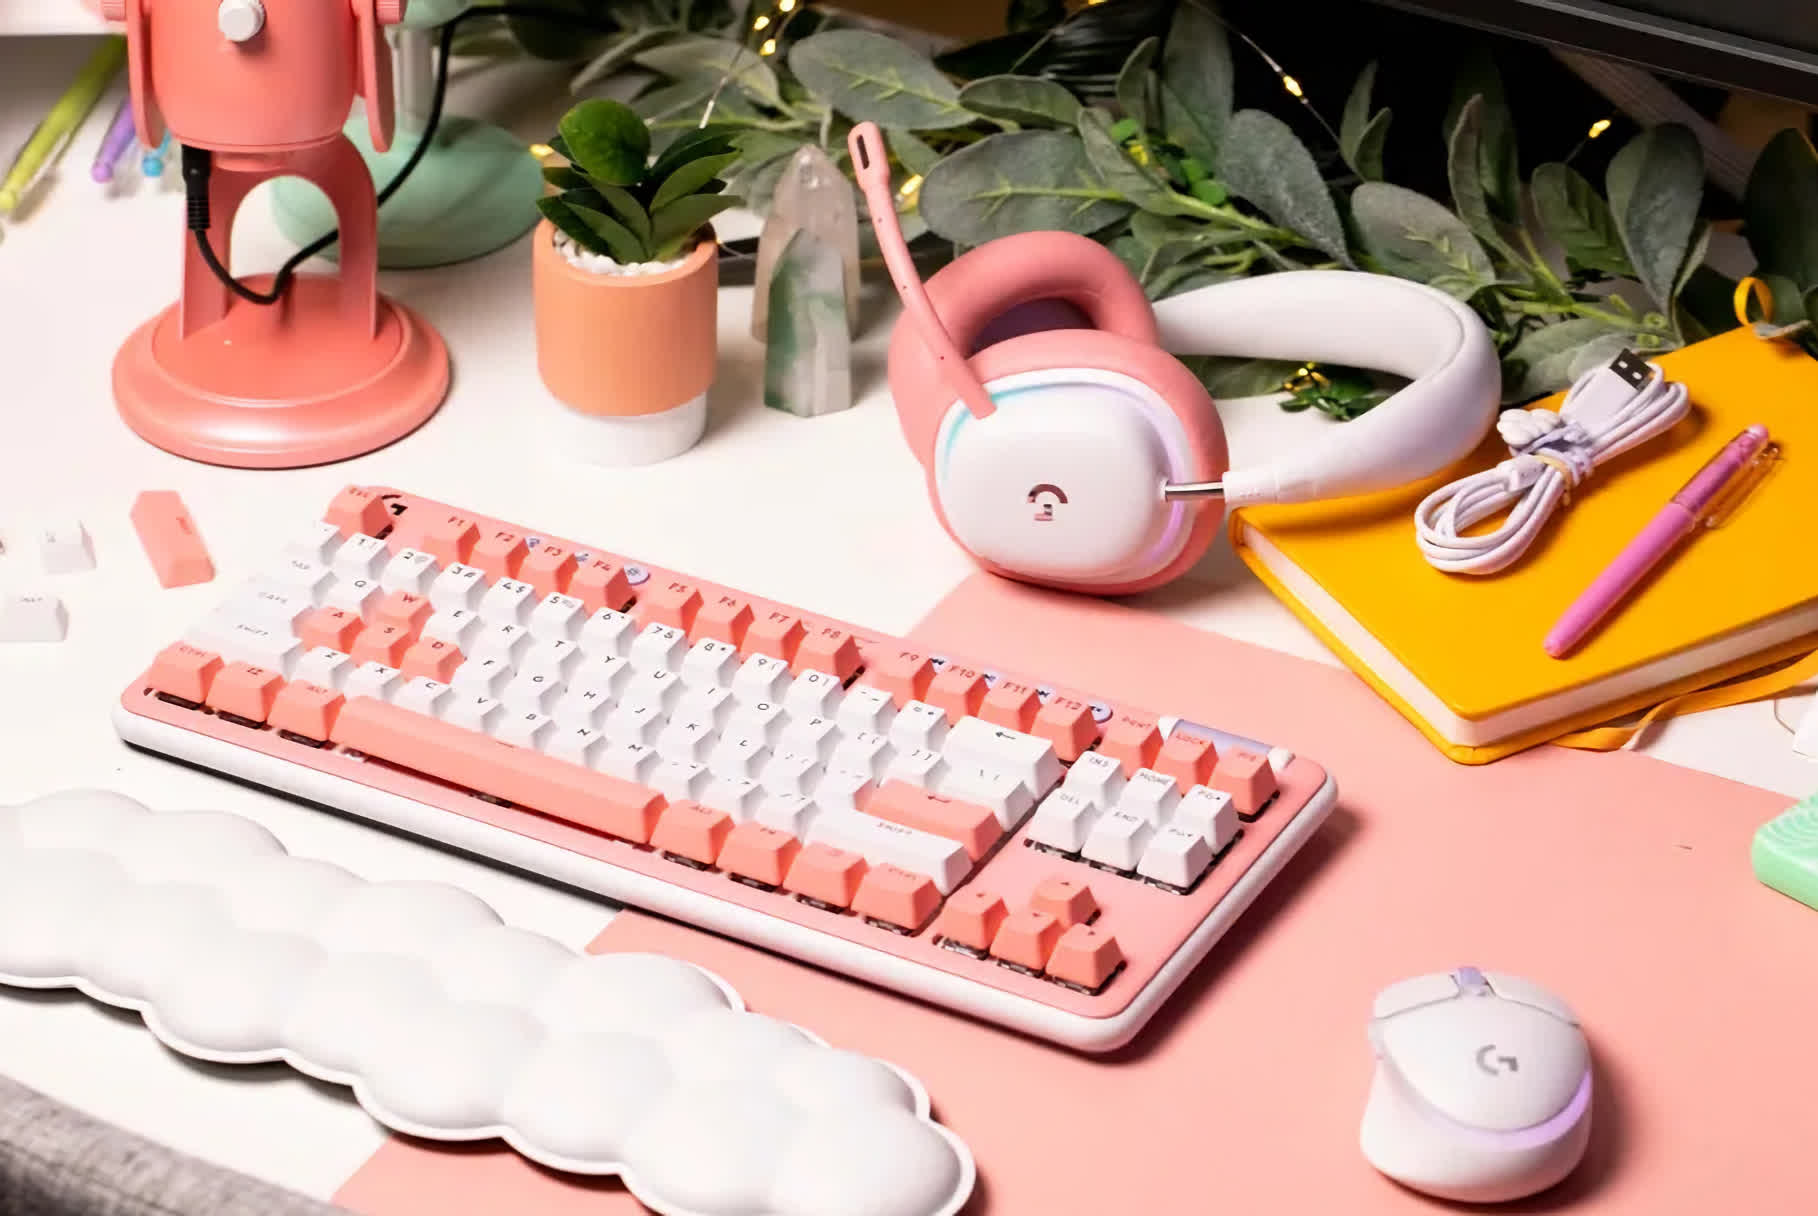 Logitech launches a new line of gaming products designed with inclusivity in mind